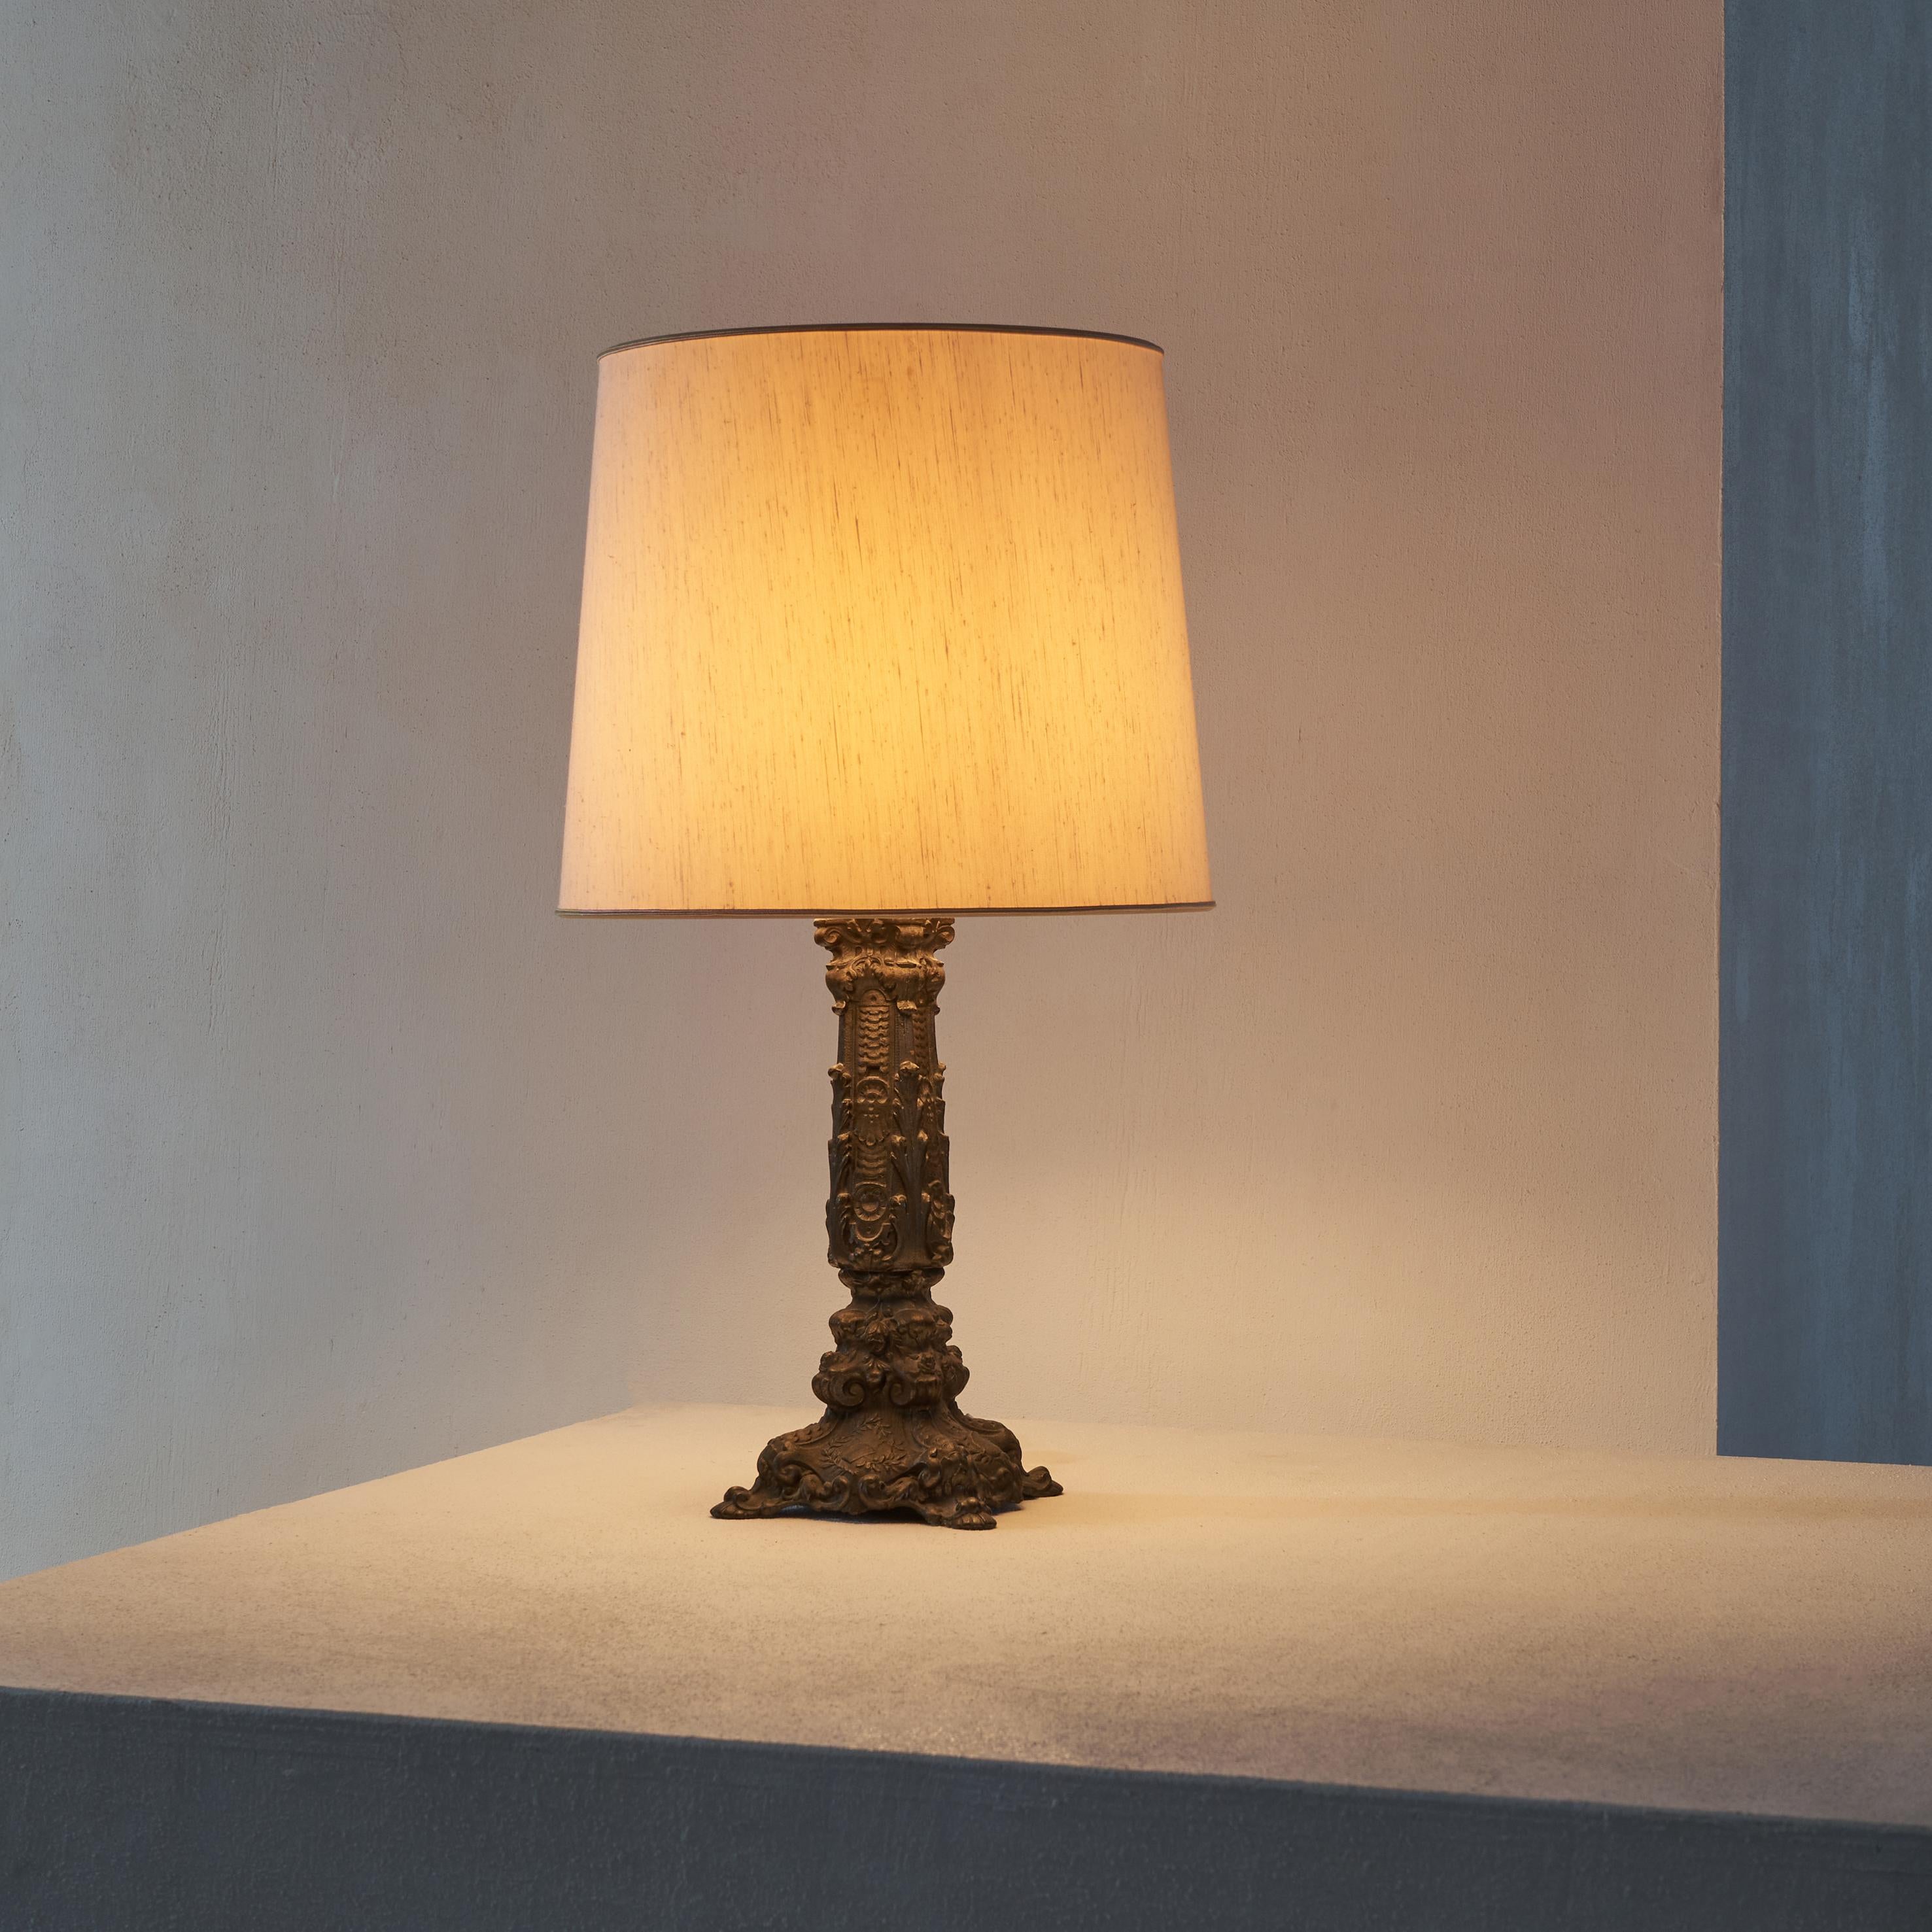 Elegant antique table lamp, late 19th century / early 20th century. 

Very decorative and elegant antique table lamp. Rich and classic in design, looking a bit baroque or rococo but subtle and symmetrical when seen up close. Overall it is a very